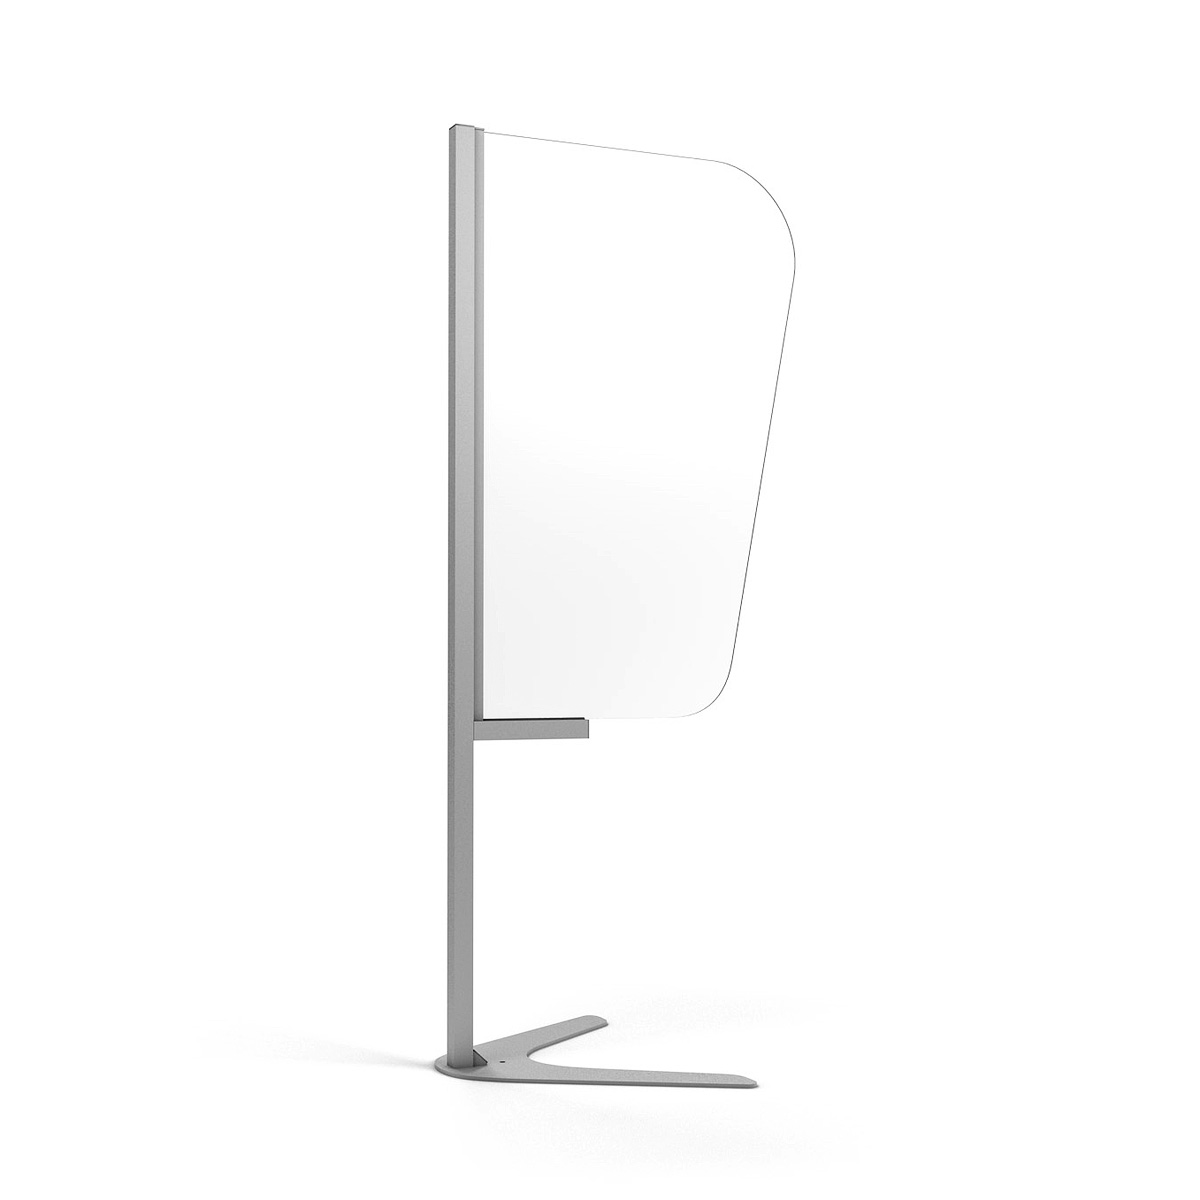 ACHOO® Patient Waiting Room Divider With Frosted Perspex Screen For Adding Privacy Between Patients 